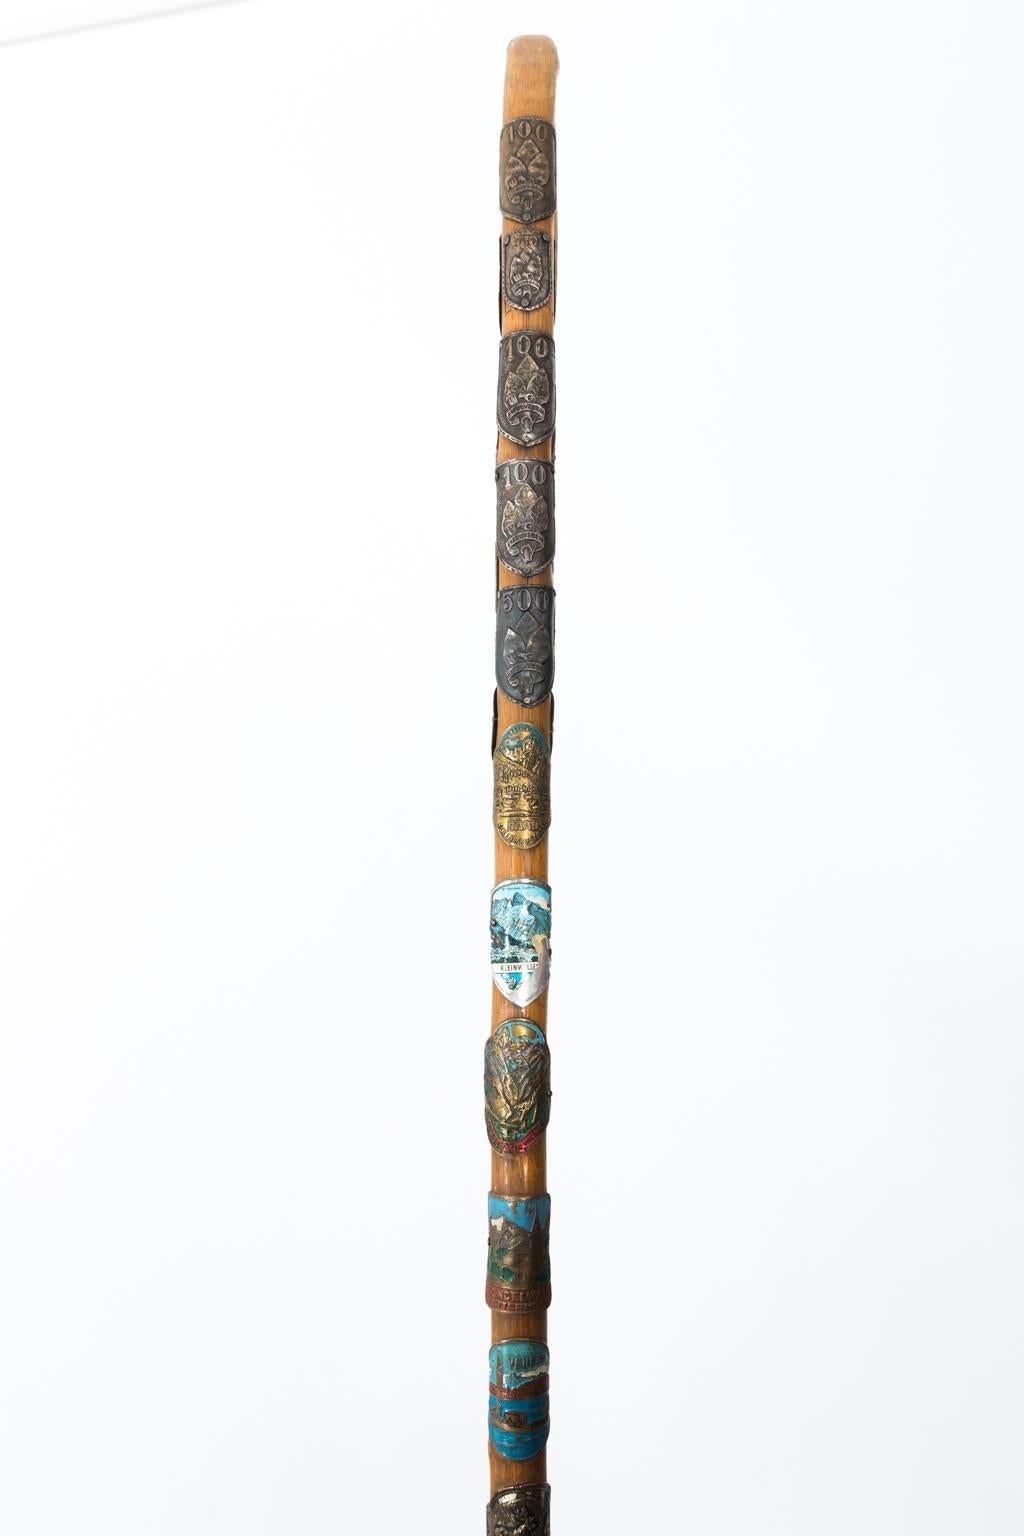 Collection of vintage German walking sticks or canes, each adorned with multiple badges that reflect locations visited, circa early 20th century. The engraved and panted medallions are also attached to the canes as badges of honor. The walking